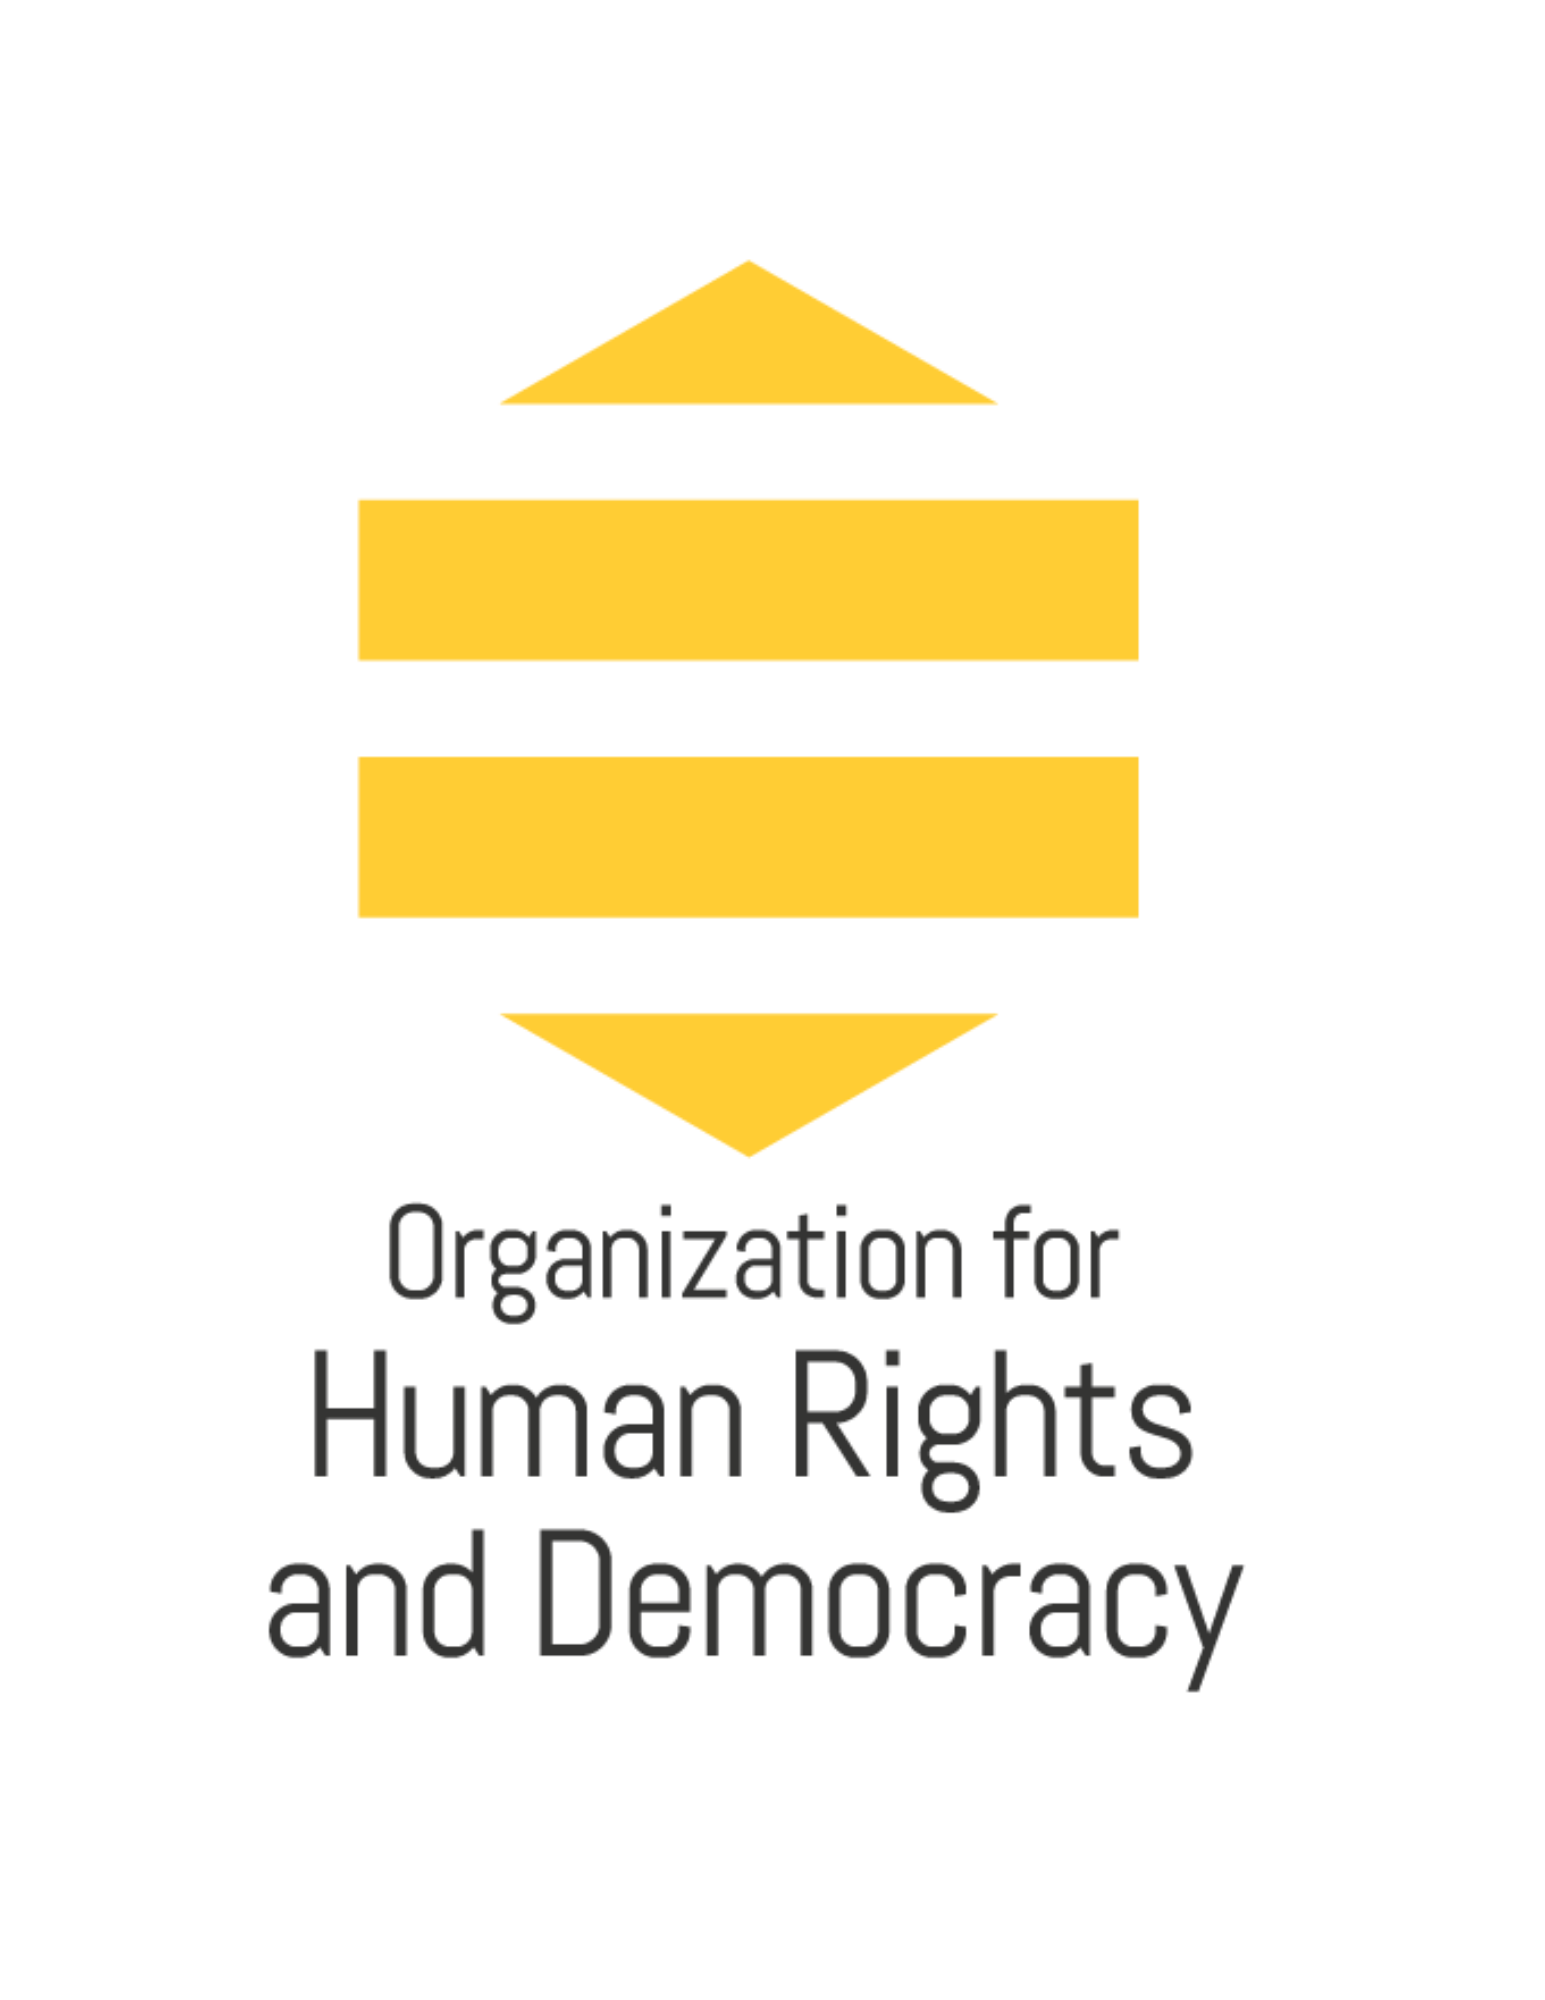 Organization for Human Rights and Democracy logo